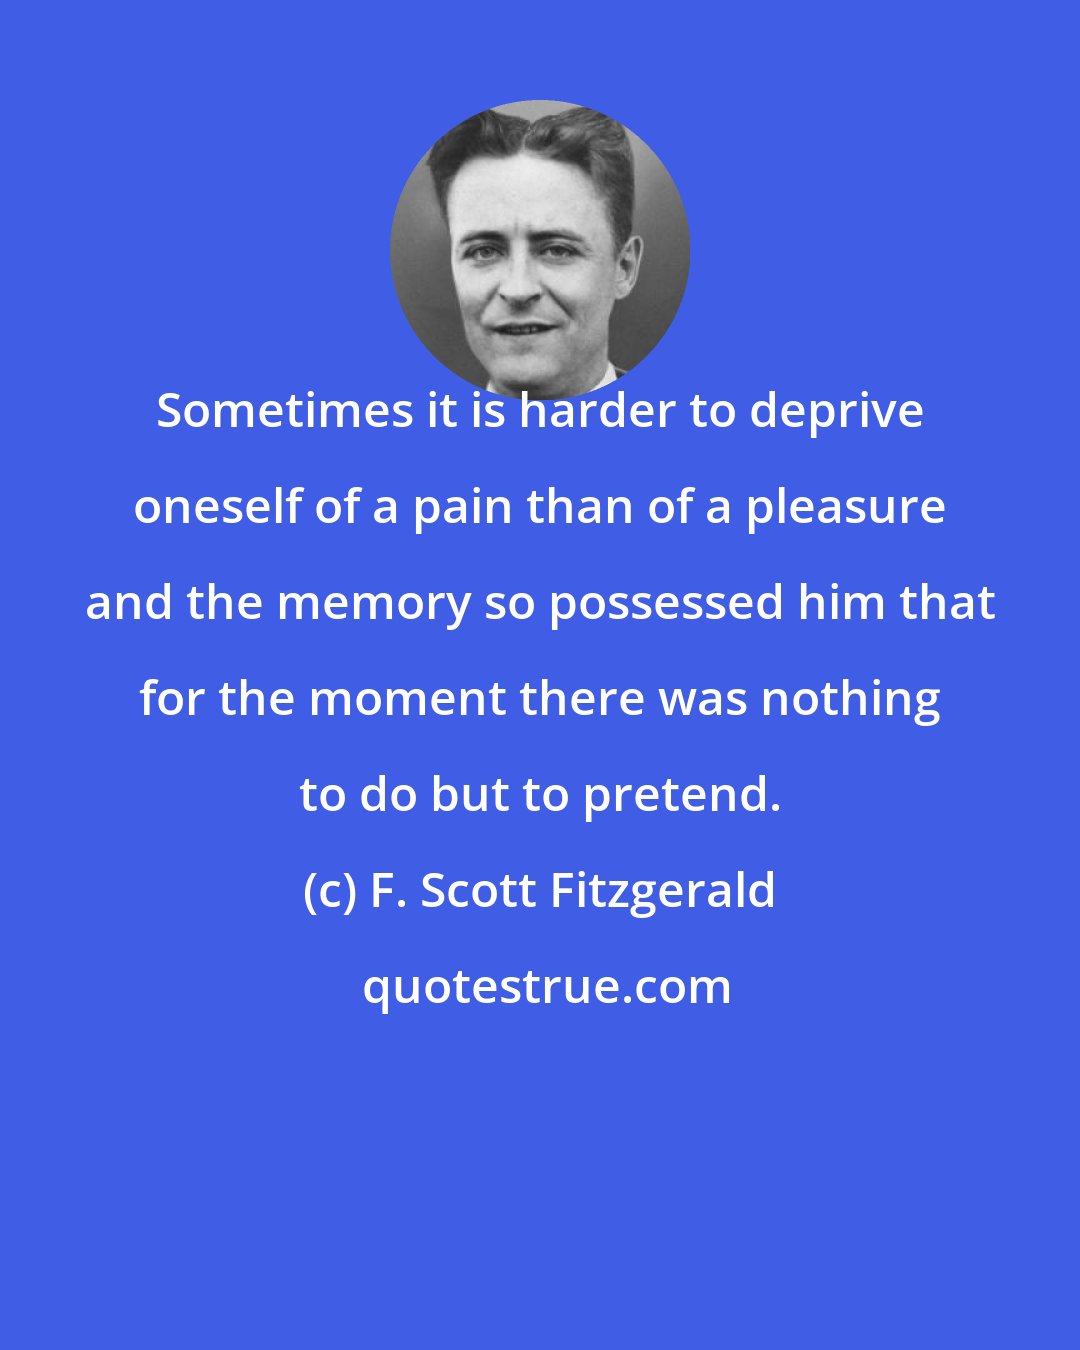 F. Scott Fitzgerald: Sometimes it is harder to deprive oneself of a pain than of a pleasure and the memory so possessed him that for the moment there was nothing to do but to pretend.